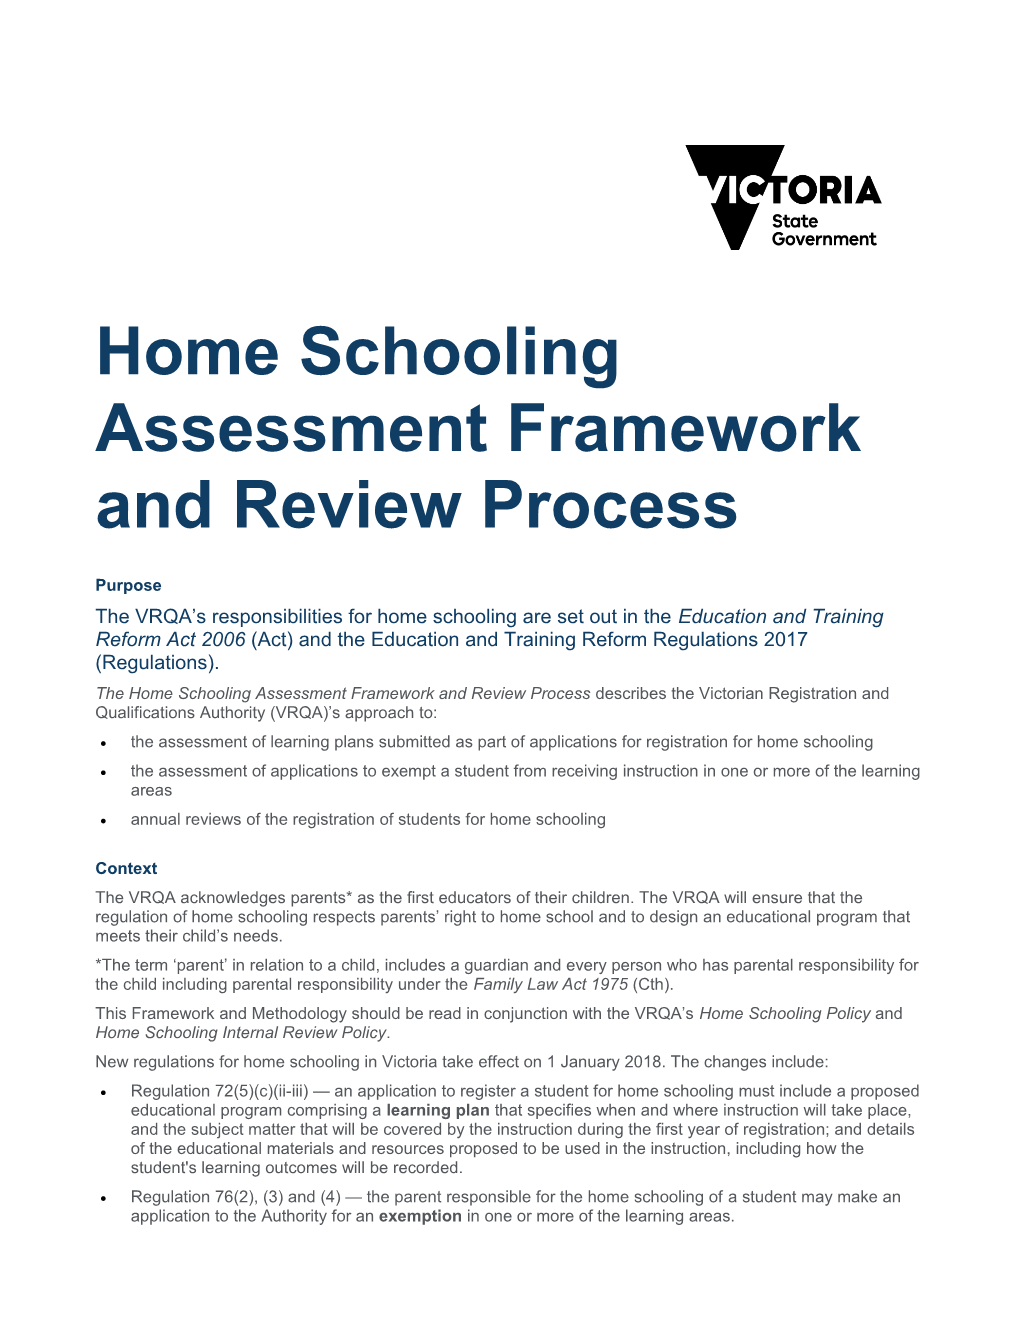 Home Schoolingassessment Framework and Review Process